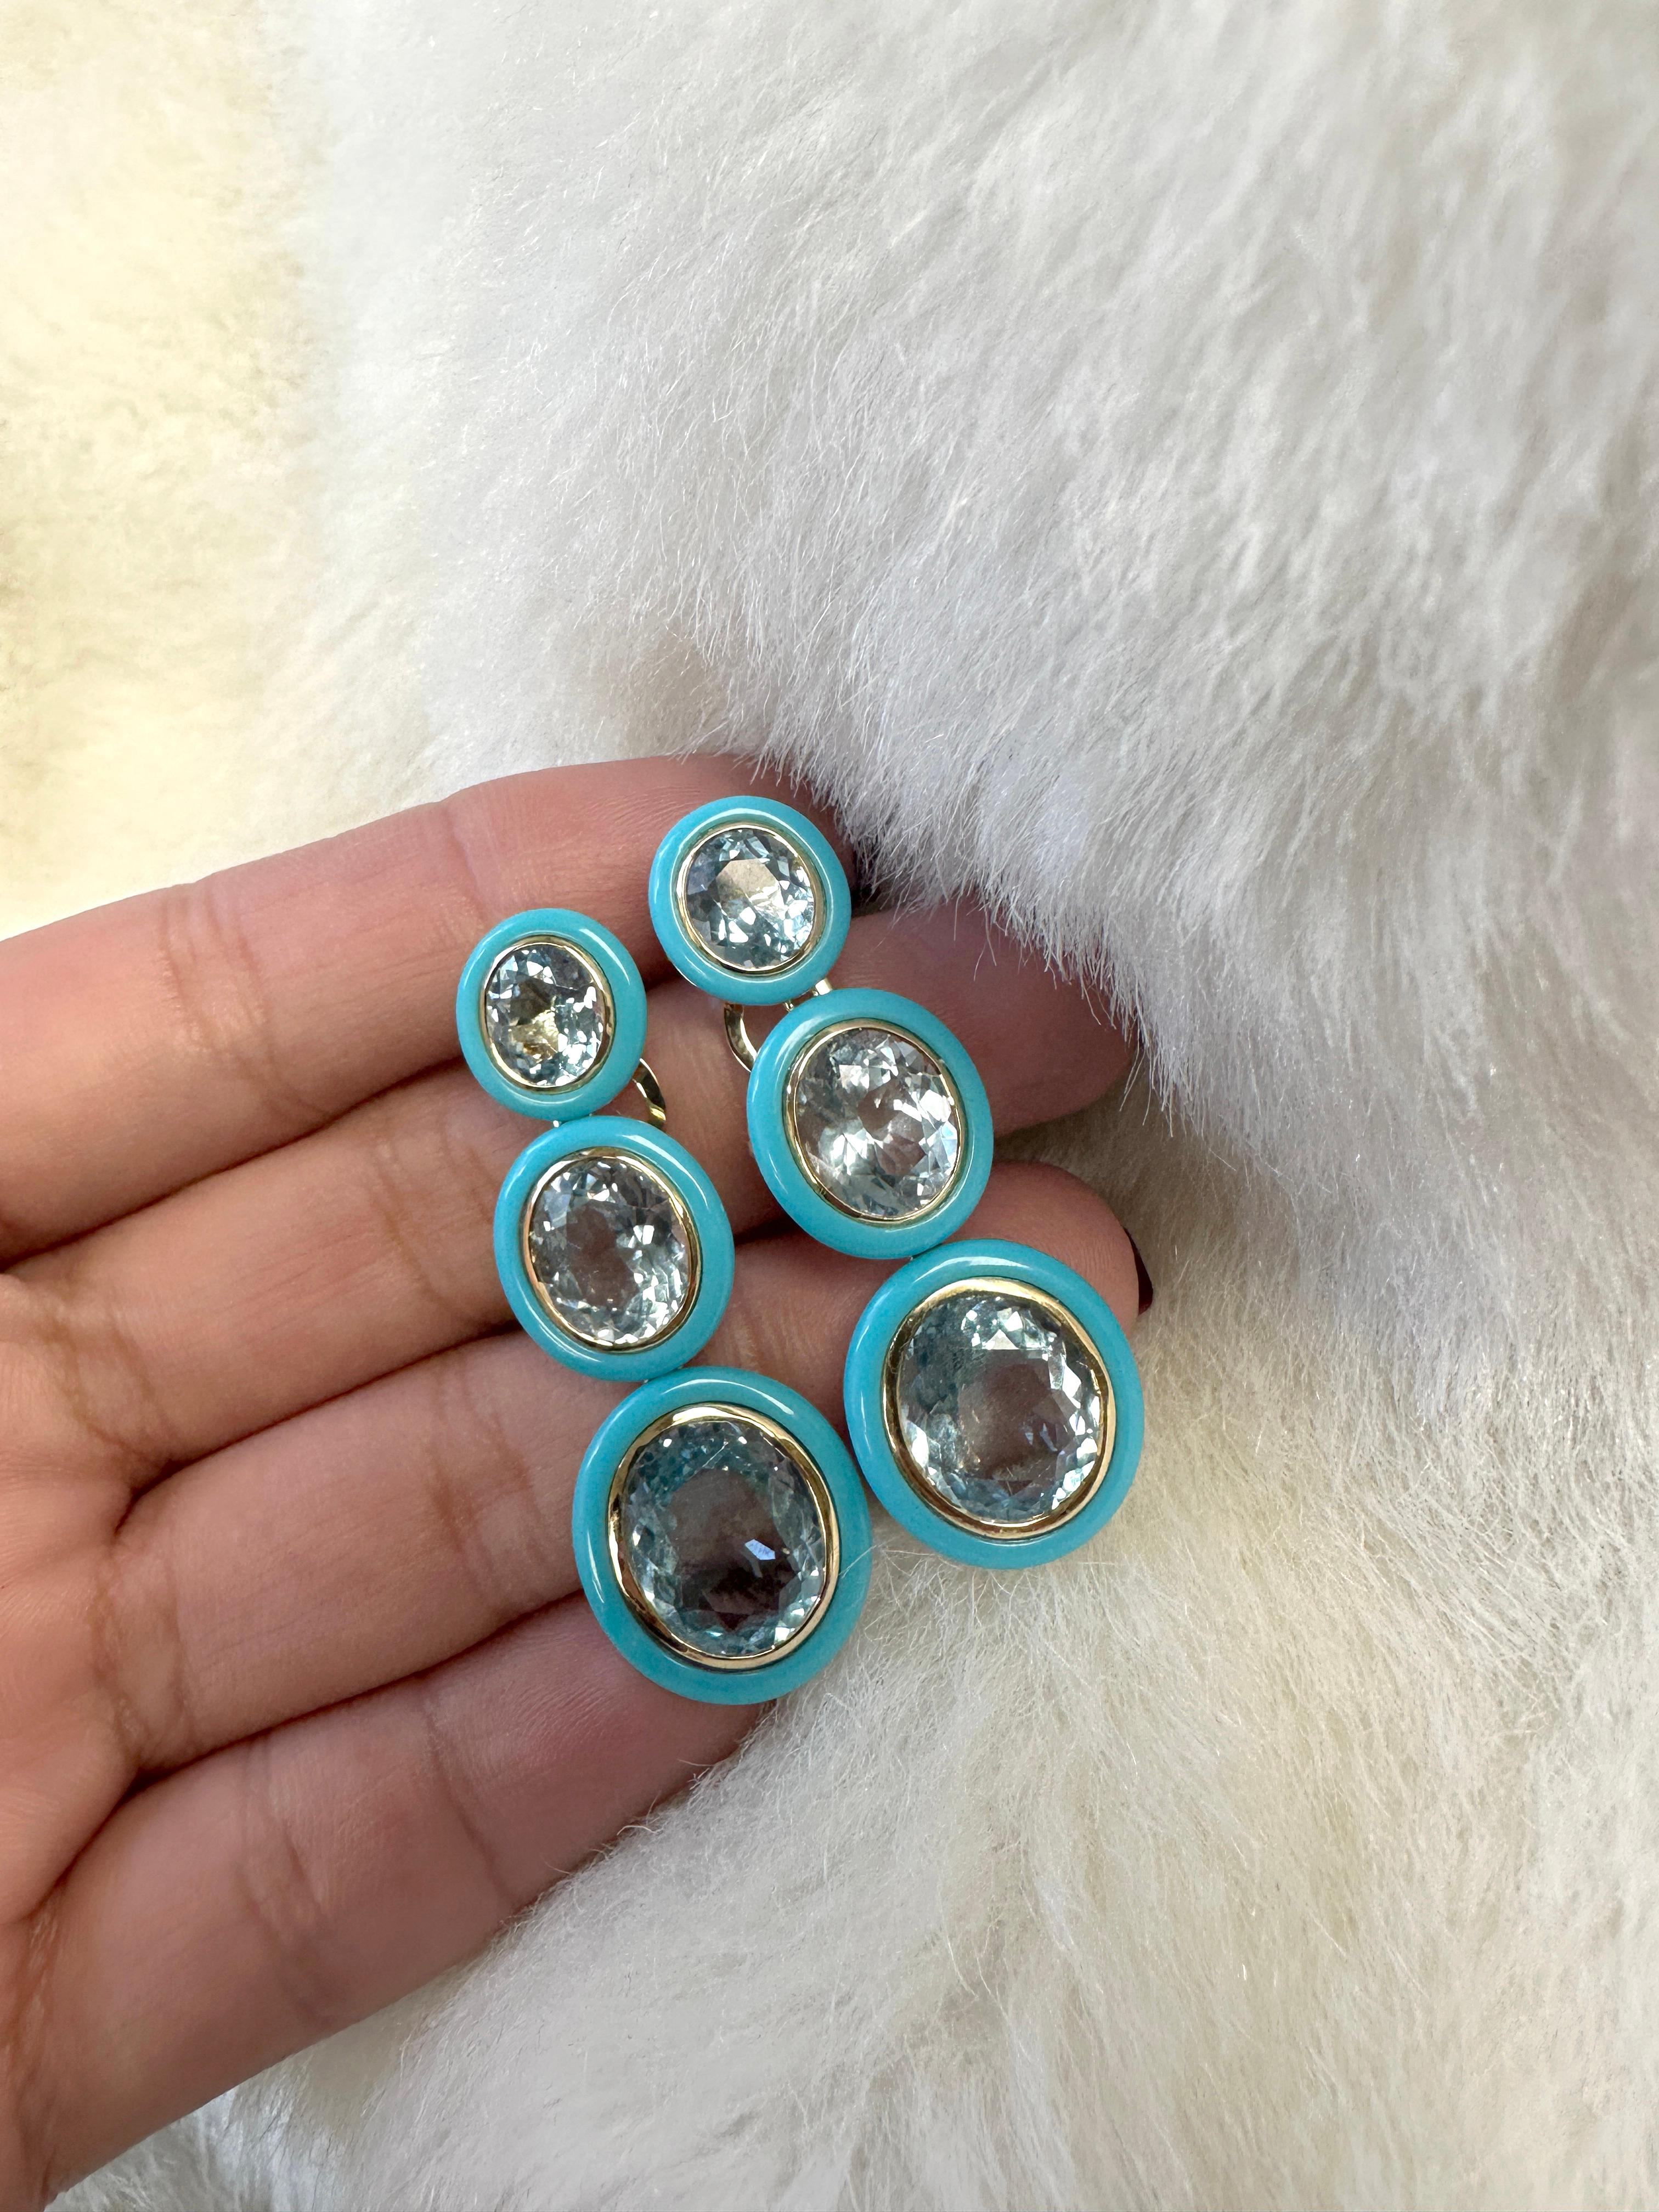 These 3 tier Oval Shape Blue Topaz & Turquoise Earrings in 18K Yellow Gold are a stunning piece of jewelry from the 'Melange' Collection. The earrings feature three oval-shaped Blue Topaz gemstones, with turquoise border. The gemstones are set in